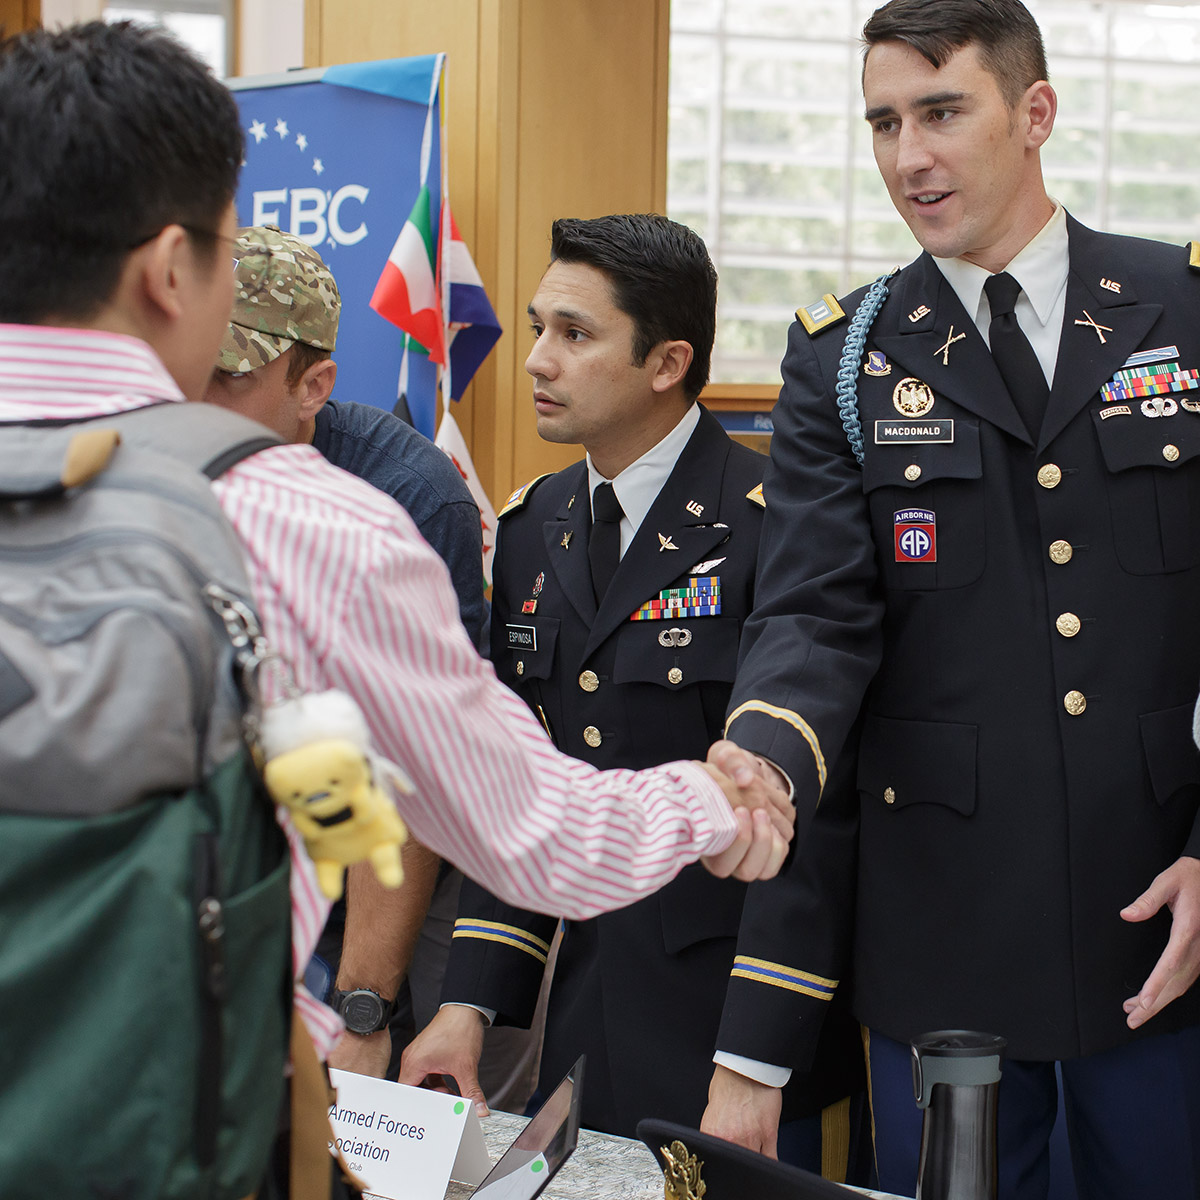 A student wearing a military uniform shakes the hand of another student dressed in civilian clothes. The interaction is happening at a table for the Duke Armed Forces Association at Duke University's Fuqua School of Business